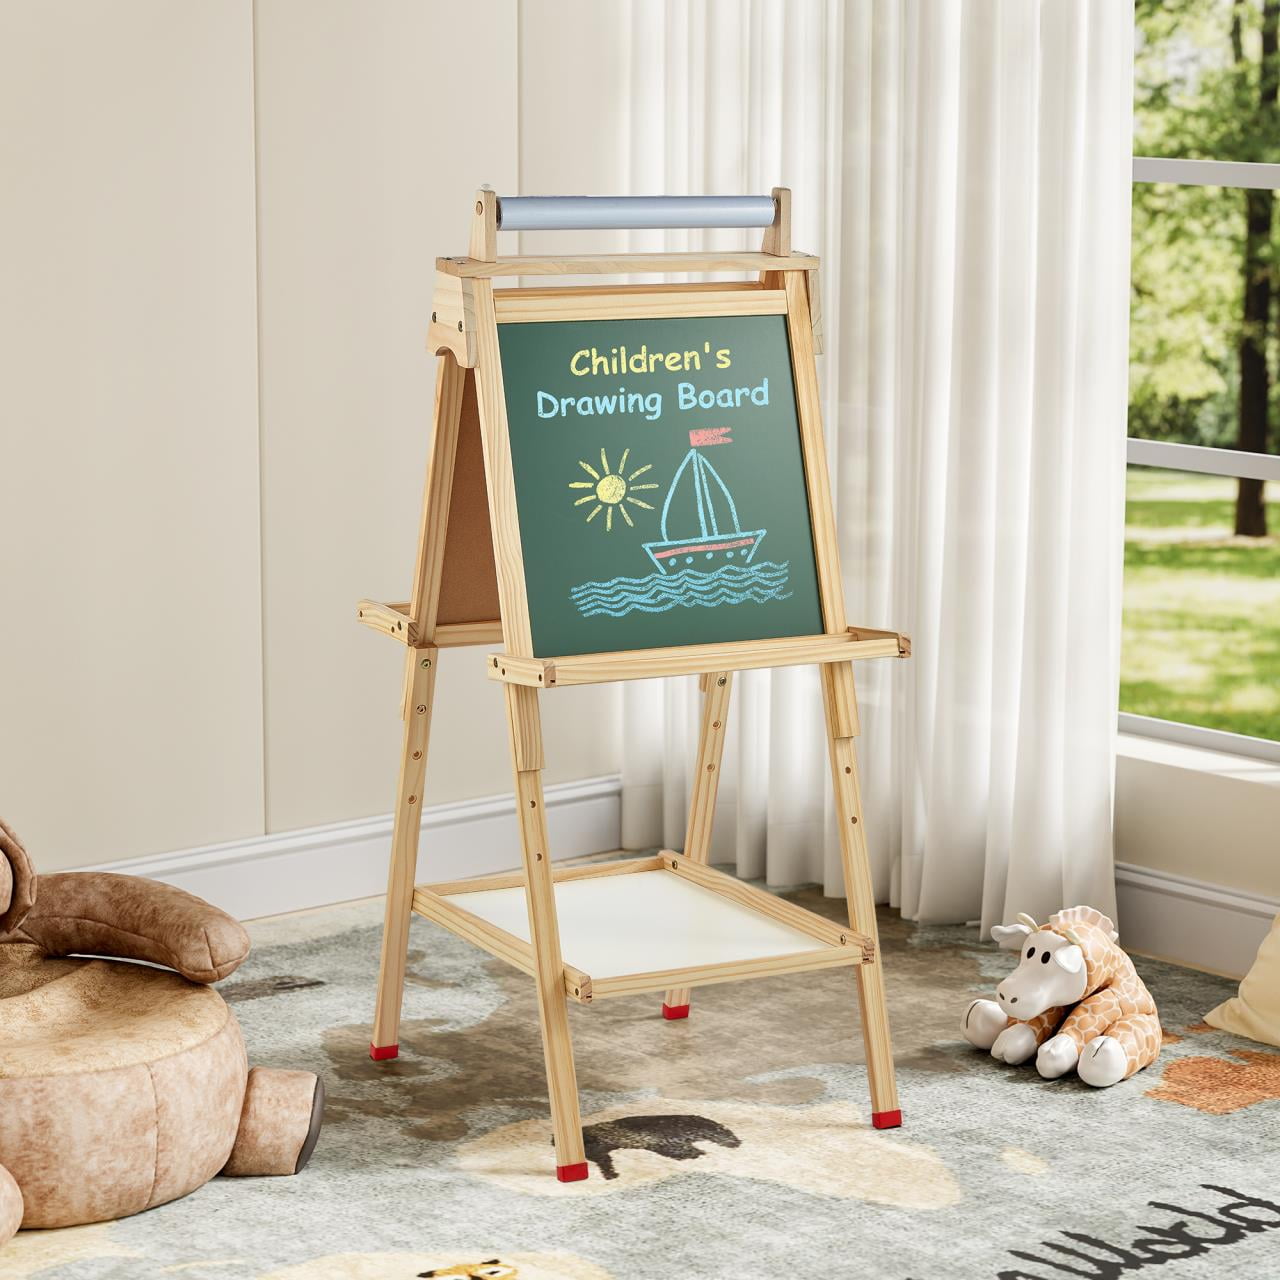 BABY 3-in-1 Kids Art Easel with Dry-Erase Board, Chalkboard, Paper Roll and  Art Supply Storage- Green - AliExpress